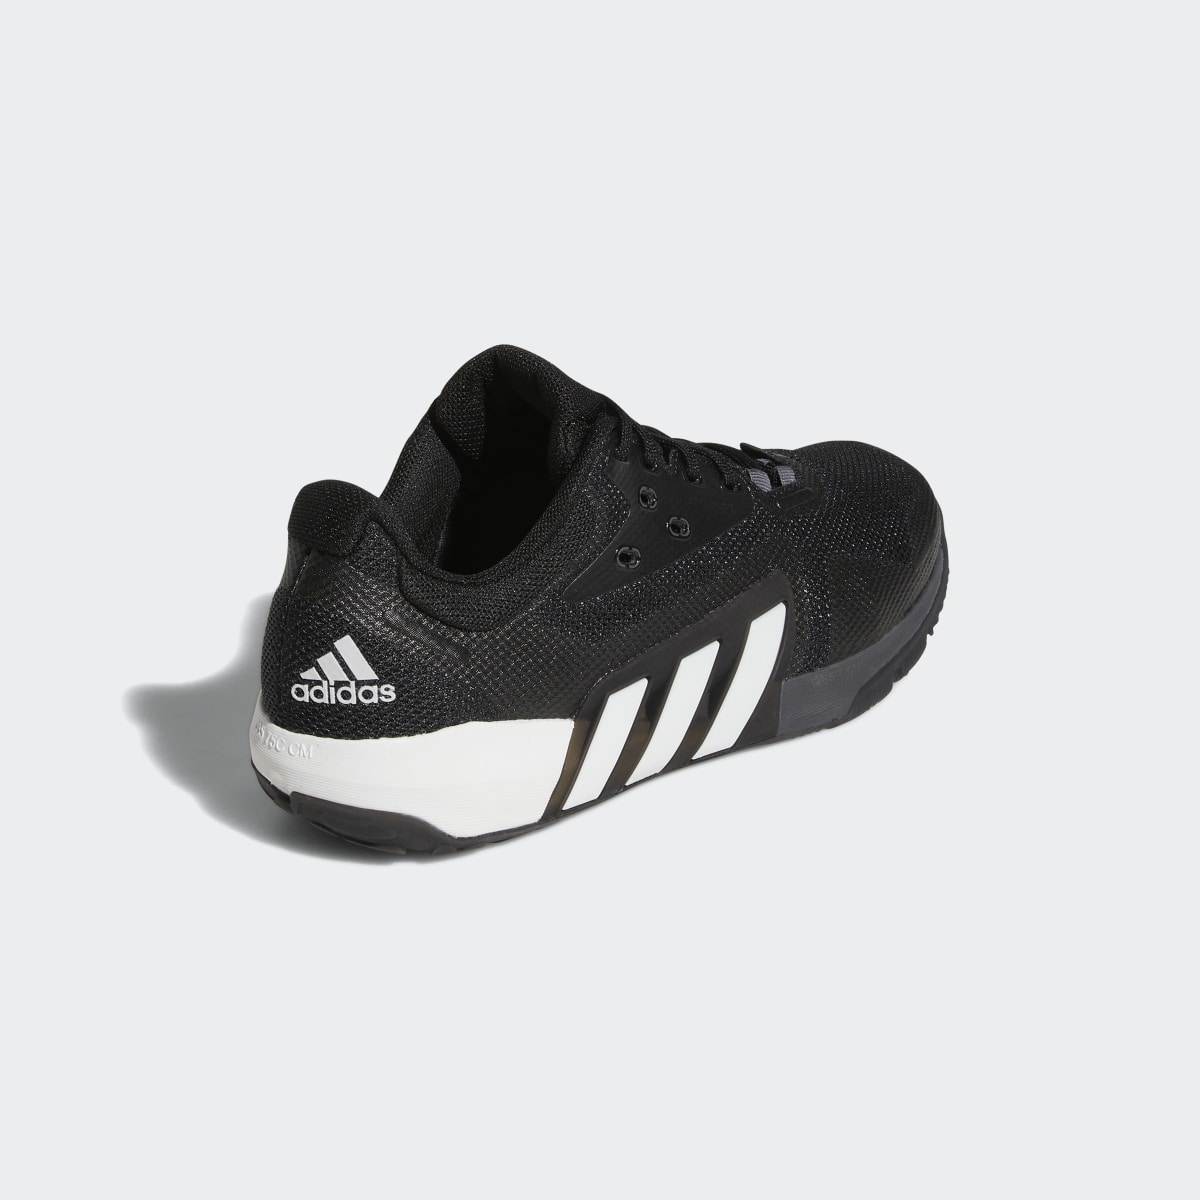 Adidas Dropset Trainers. 7